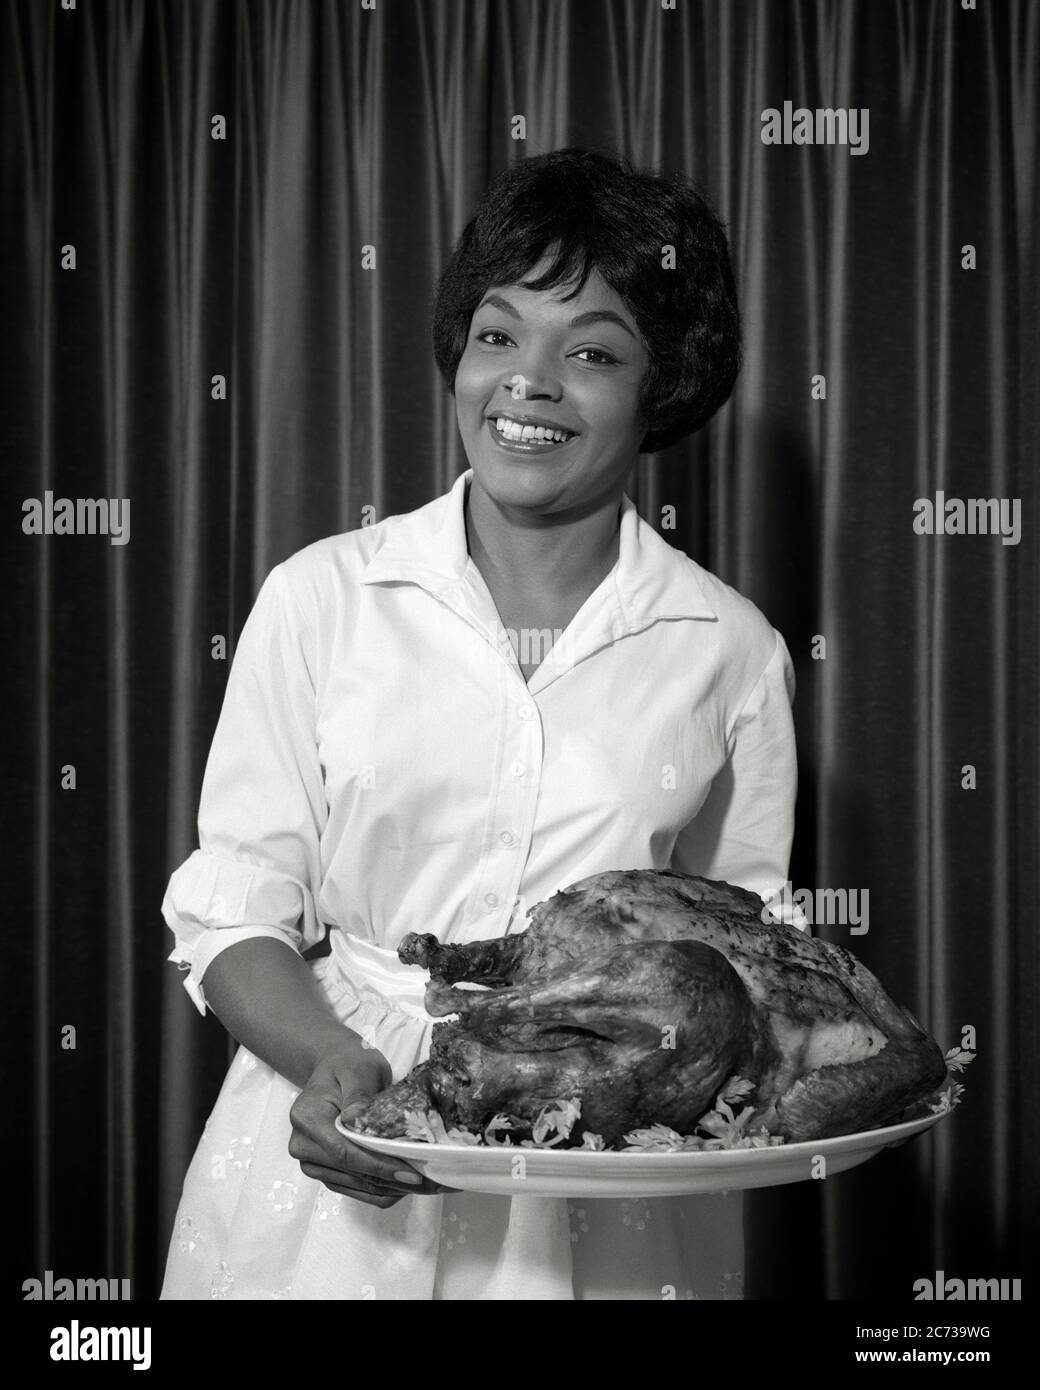 1960s SMILING AFRICAN-AMERICAN WOMAN HOLDING PLATTER WITH HOLIDAY TURKEY - n1839 HAR001 HARS HOME LIFE COPY SPACE HALF-LENGTH LADIES PERSONS INSPIRATION CONFIDENCE AMERICANA B&W EYE CONTACT HOMEMAKER HAPPINESS HOMEMAKERS CHEERFUL PRESENTING STRENGTH AFRICAN-AMERICANS AFRICAN-AMERICAN EXCITEMENT BLACK ETHNICITY HOSTESS PLATTER PRIDE HOUSEWIVES SMILES THANKFUL THURSDAY JOYFUL NATIONAL HOLIDAY STYLISH GRATEFUL JOYOUS MID-ADULT MID-ADULT WOMAN NOVEMBER BLACK AND WHITE FOOD PREPARATION HAR001 OLD FASHIONED AFRICAN AMERICANS Stock Photo